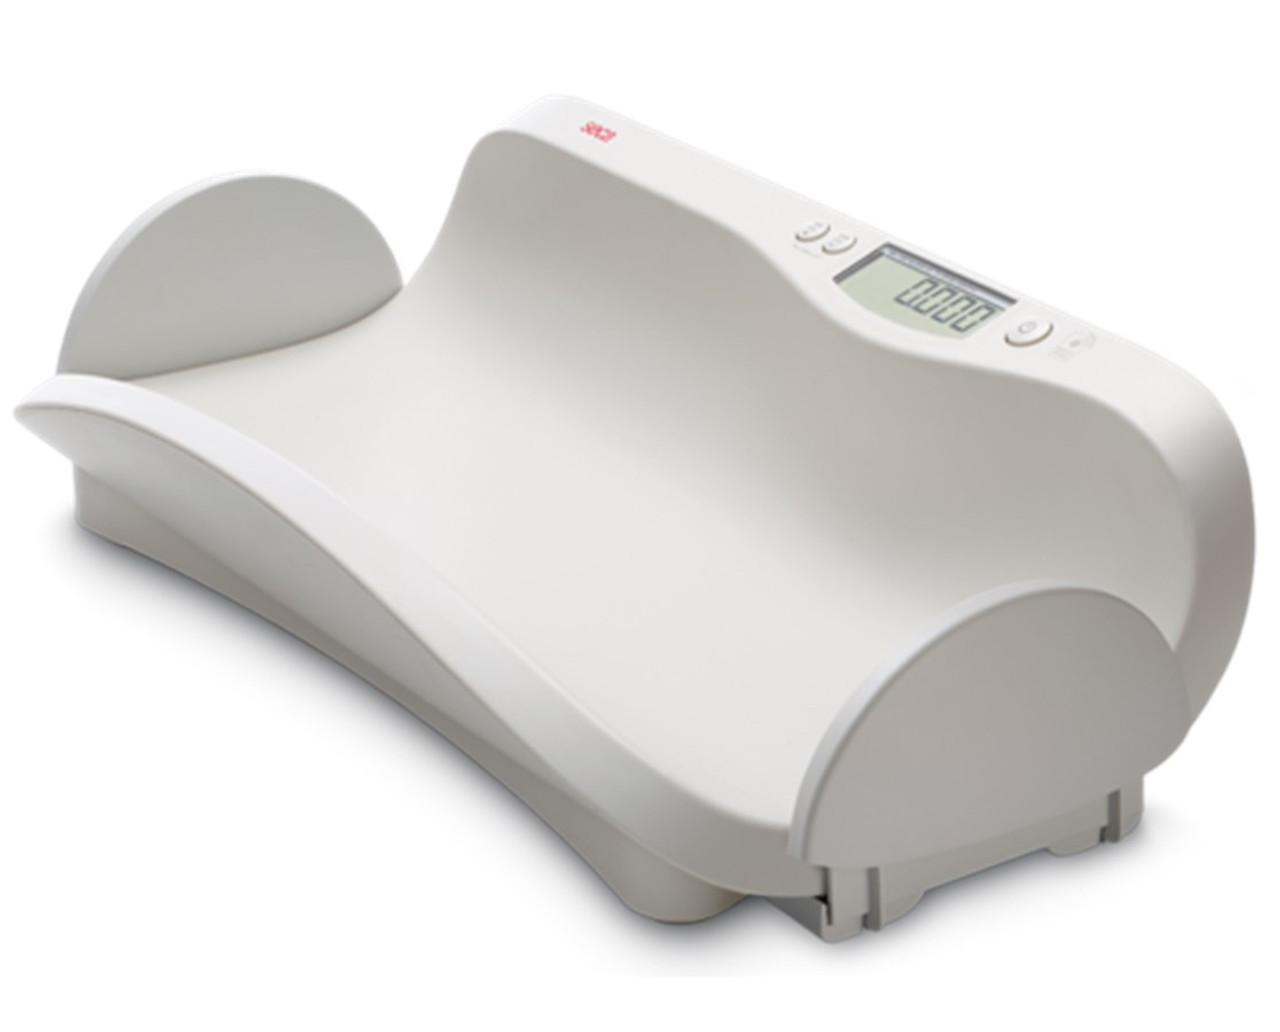 Detecto 451 Mechanical Baby Scale